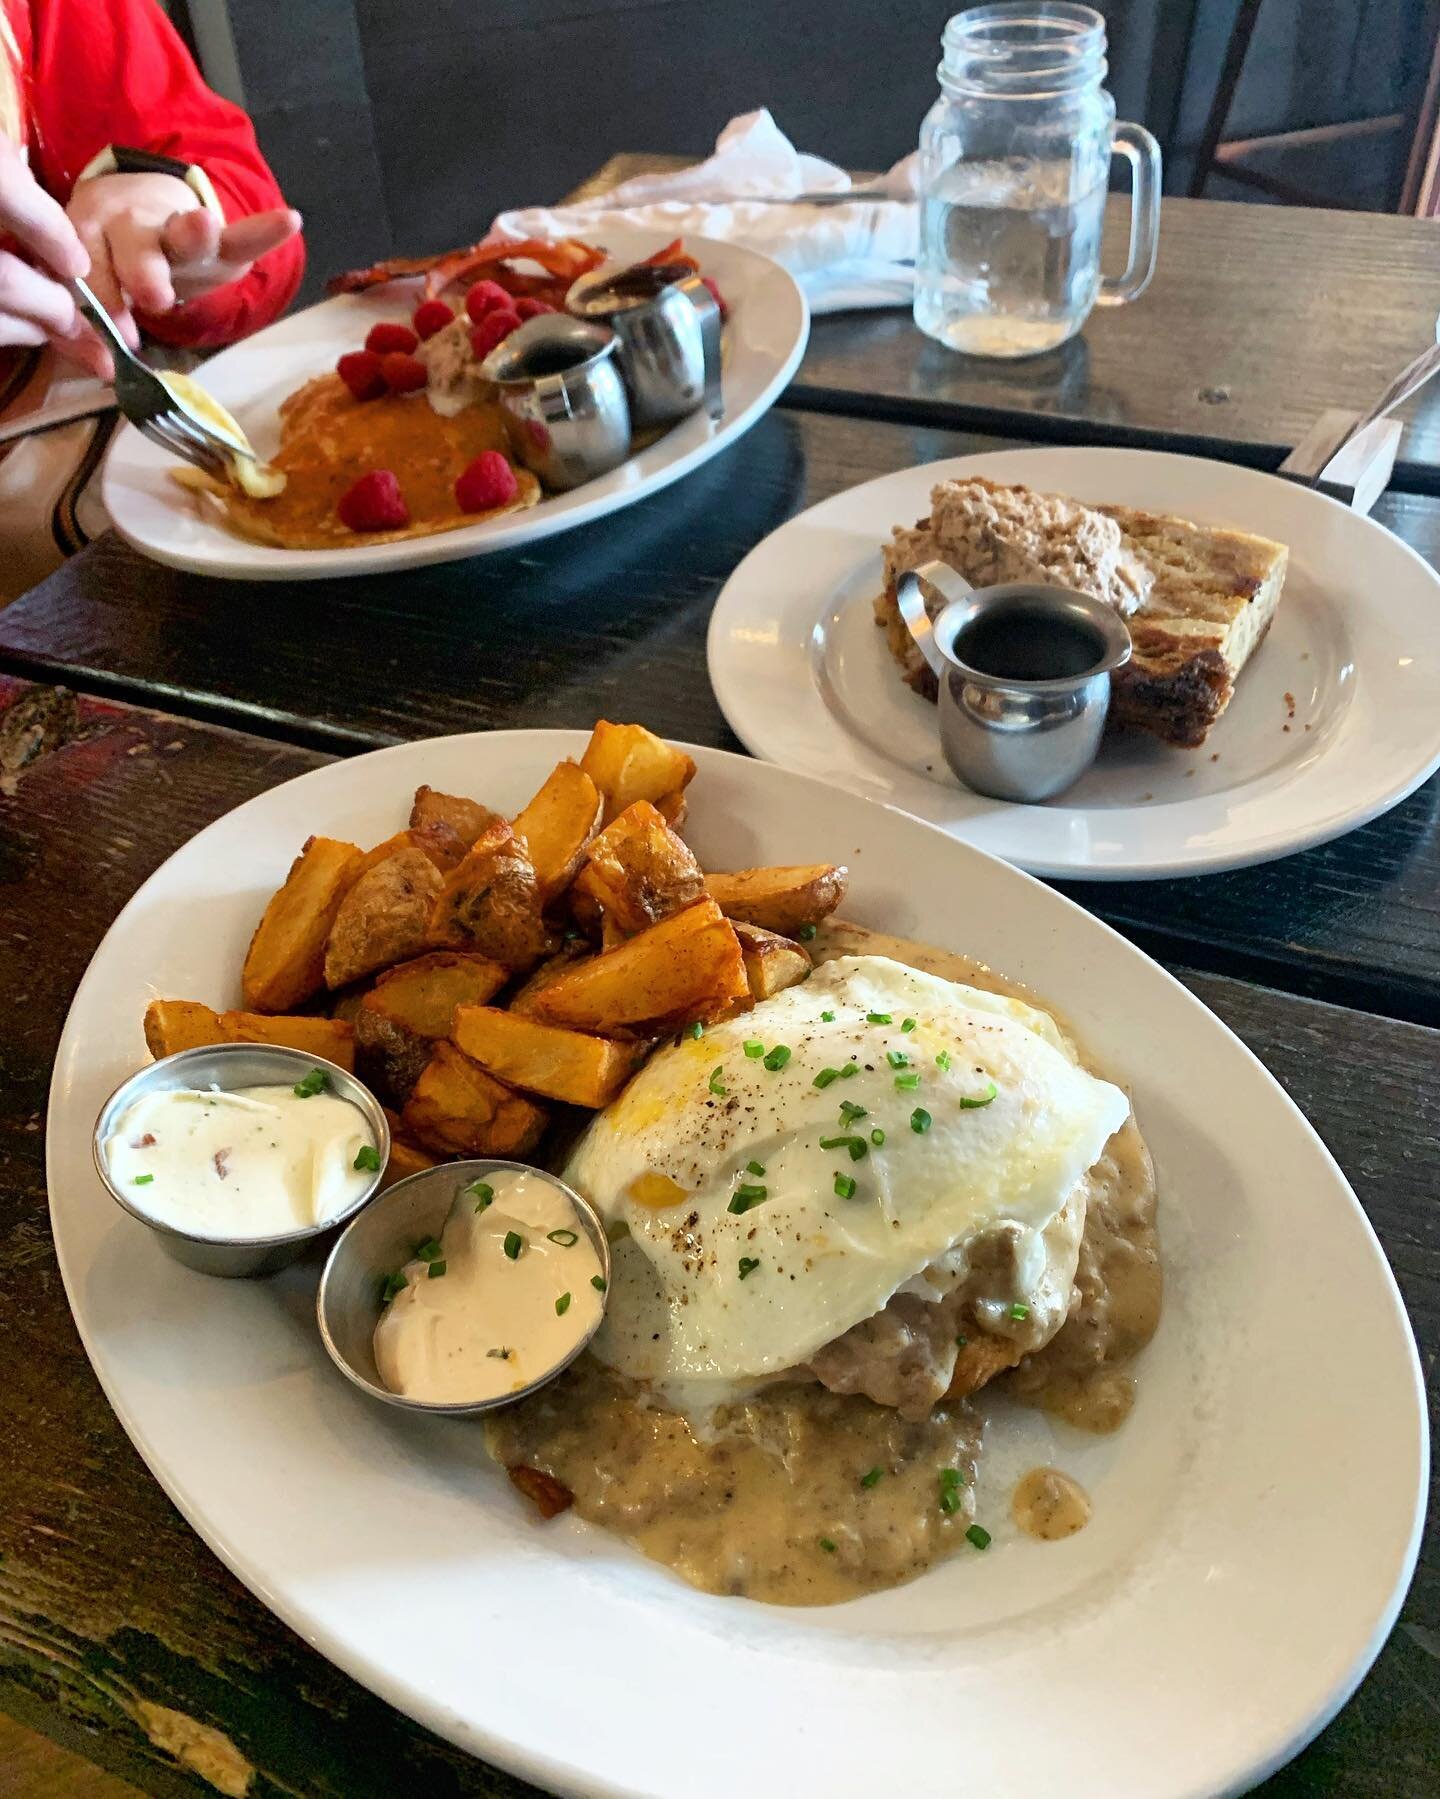 Brunch at @thecopperhen 🤩 can&rsquo;t go wrong!!! 
 ⠀⠀⠀⠀⠀⠀⠀⠀⠀⠀⠀⠀
Some biscuits and gravy 🍳 always hits the spot and the ones from the Copper Hen are no different! 😋 the breakfast potatoes 🥔 are crisp on the outside and soft in the middle.  The br